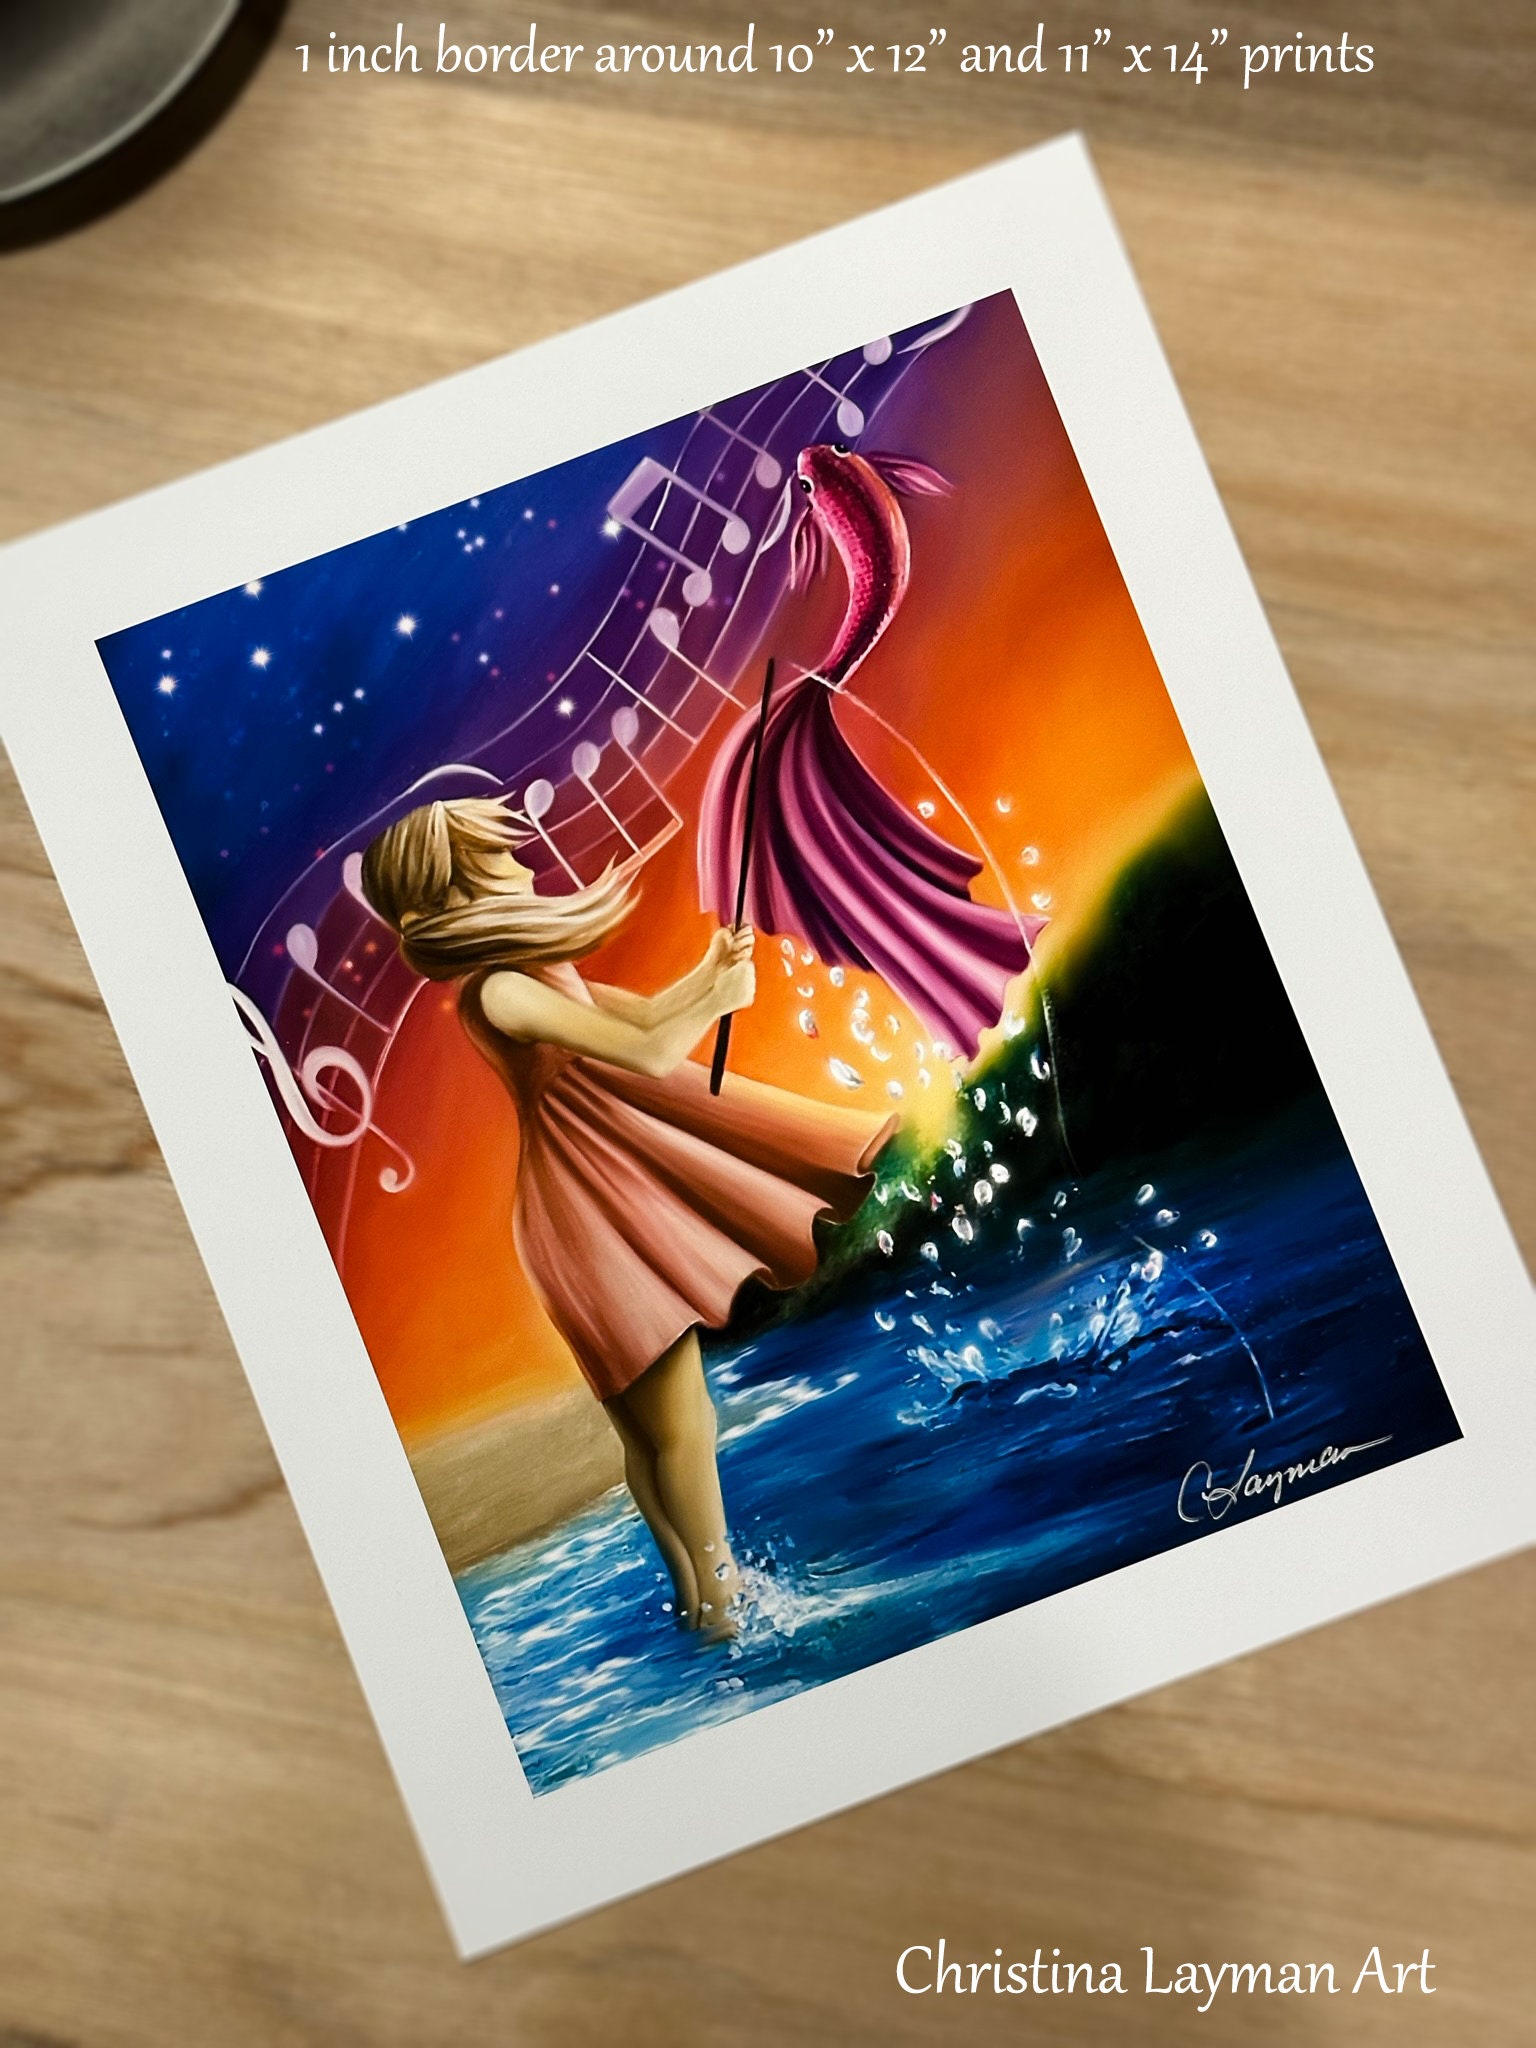 The Greatest Showman A Million Dreams Mother & Child Song Lyric Print -  Song Lyric Designs